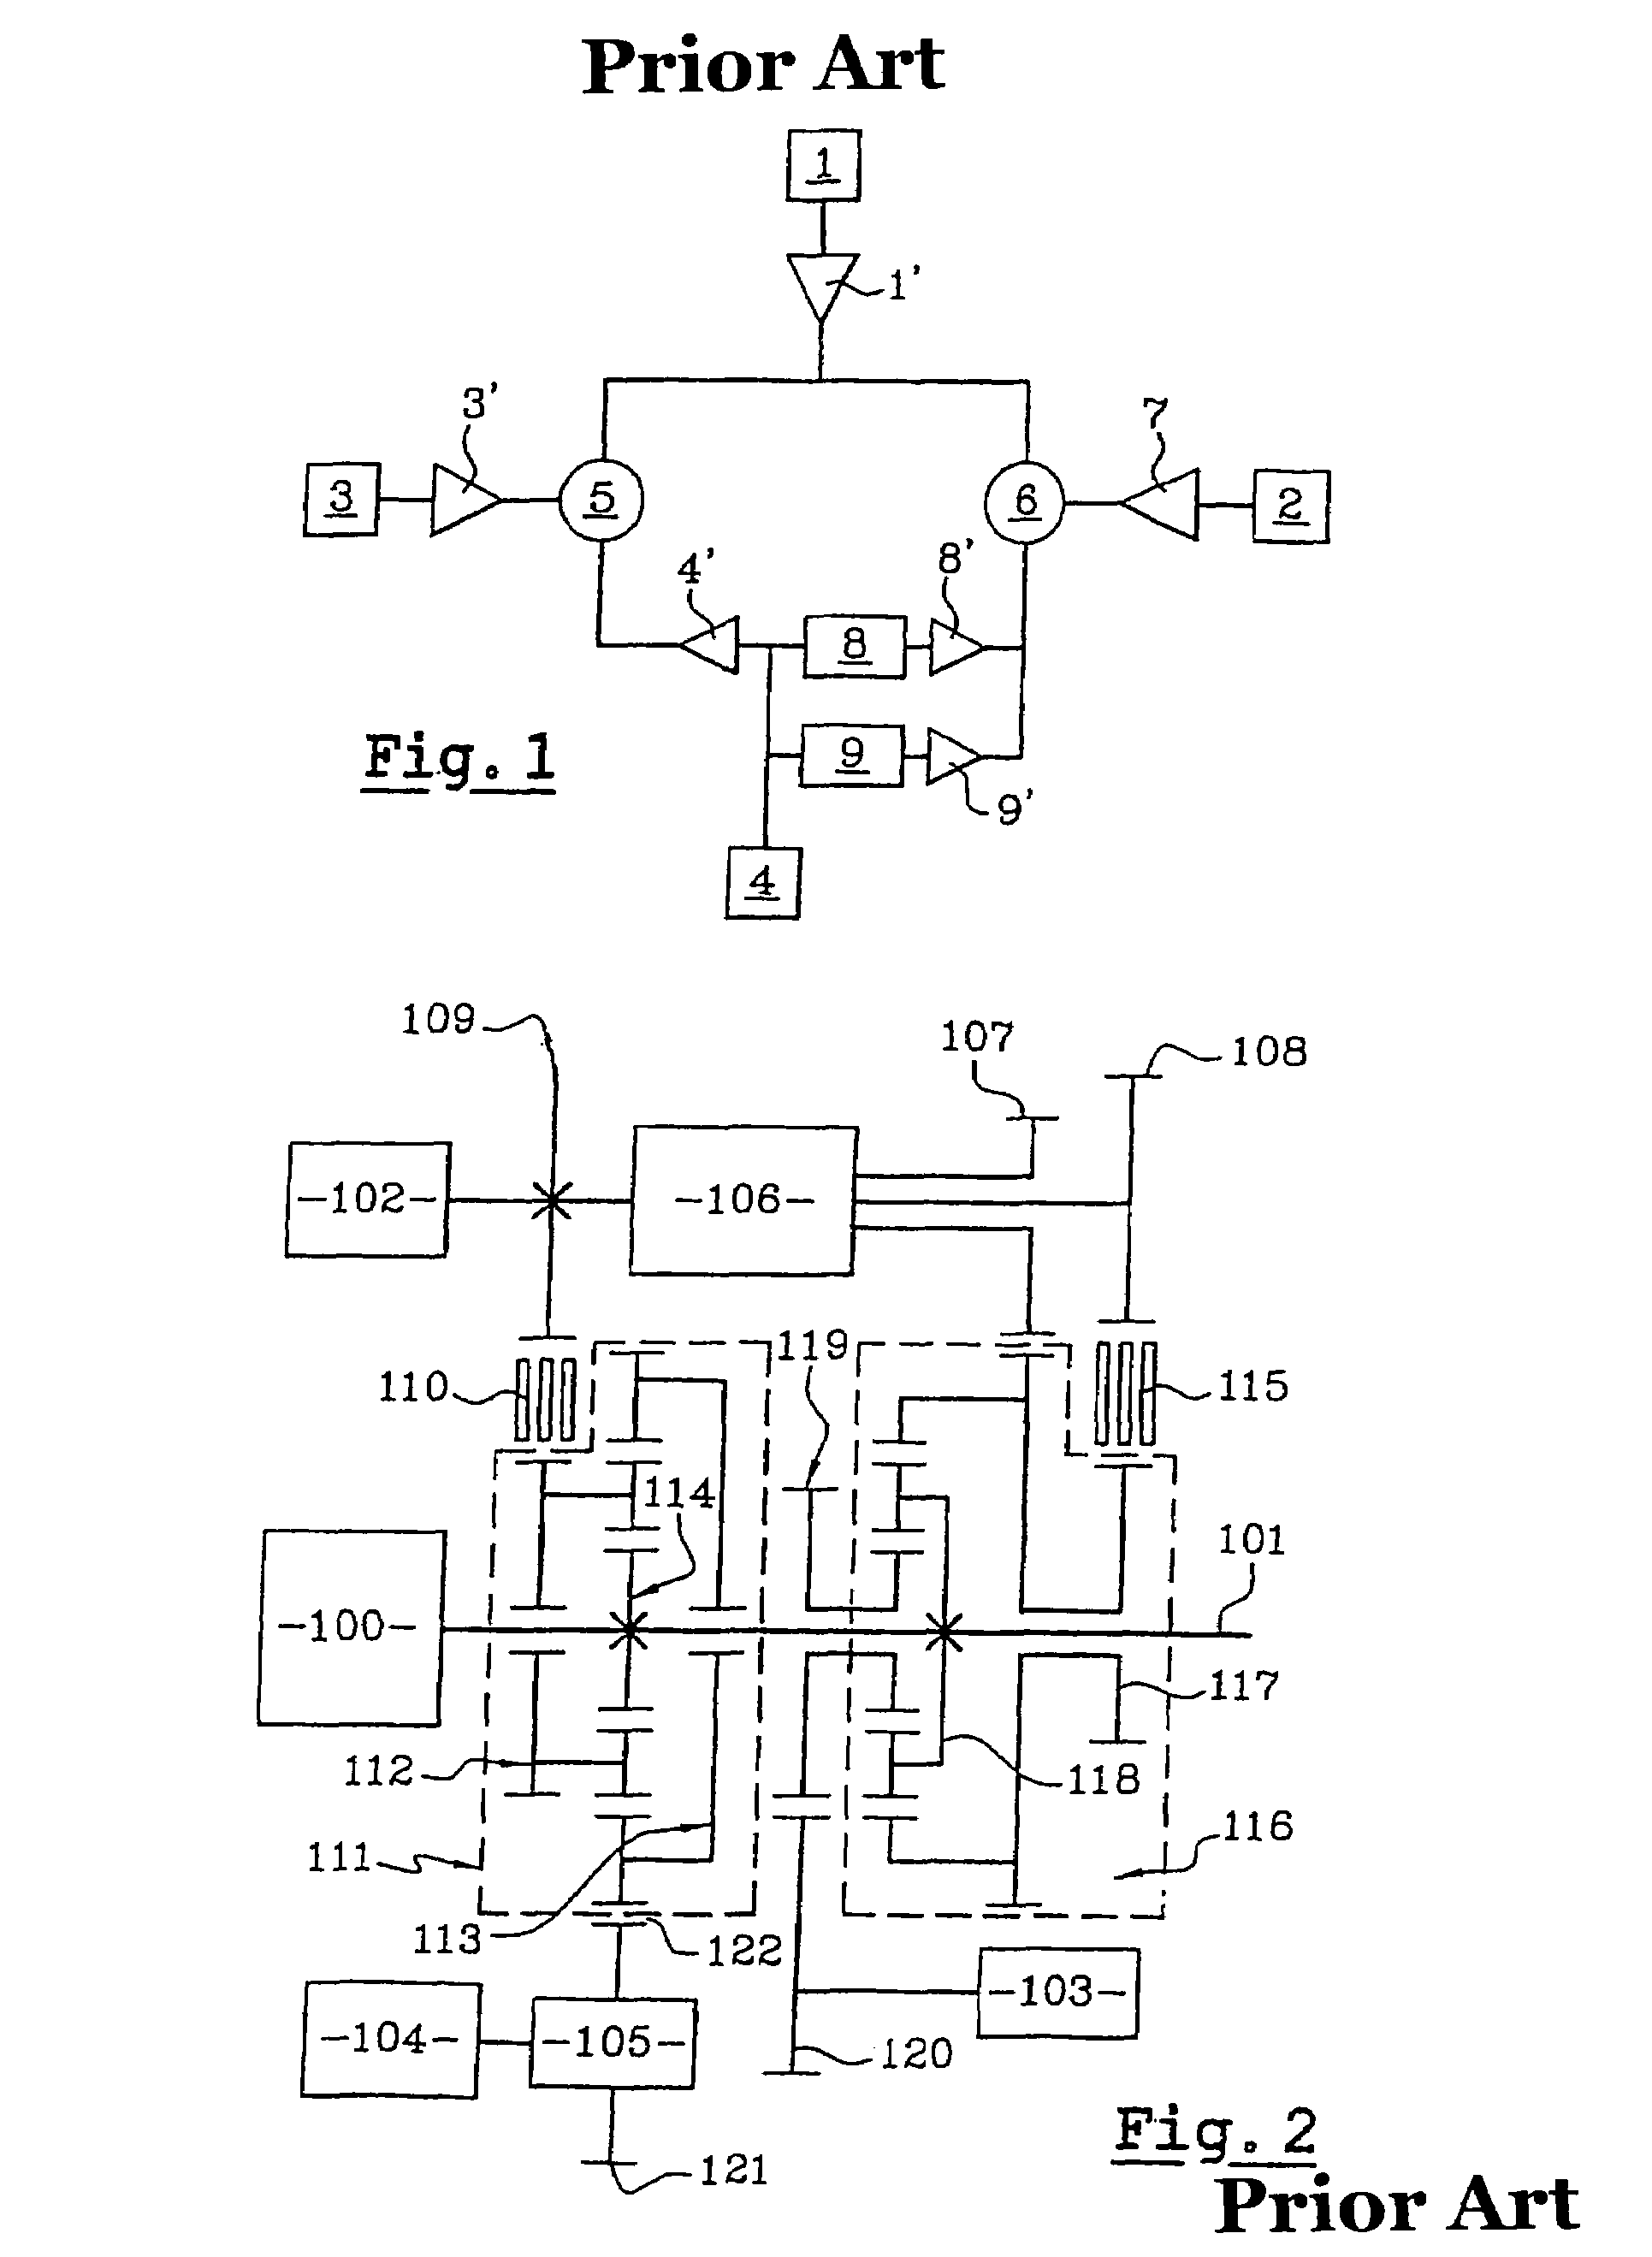 Infinitely variable transmission with power branching, with electric selector